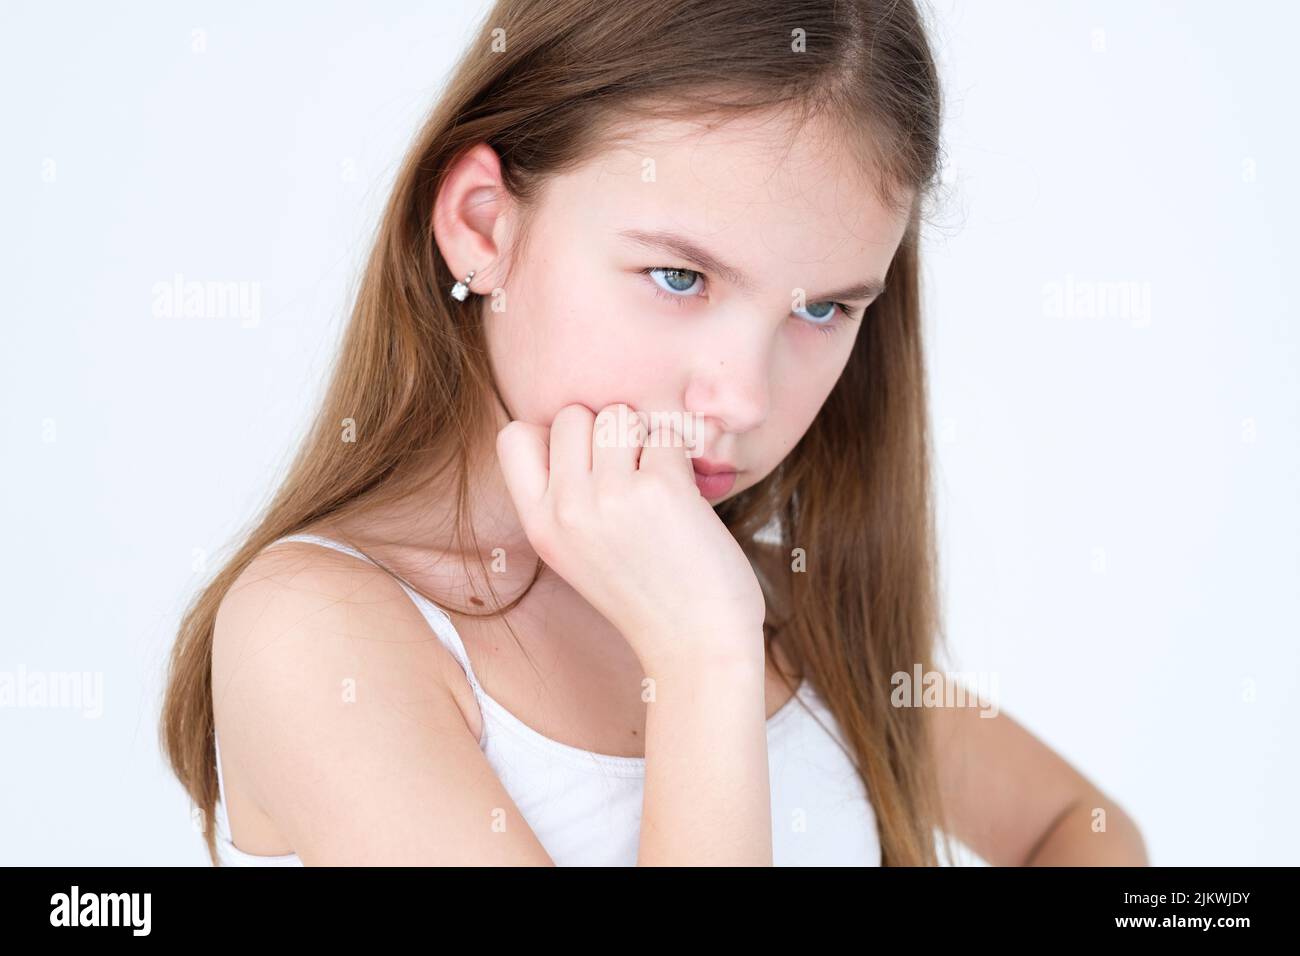 emotion thoughtful face expression girl pensive Stock Photo